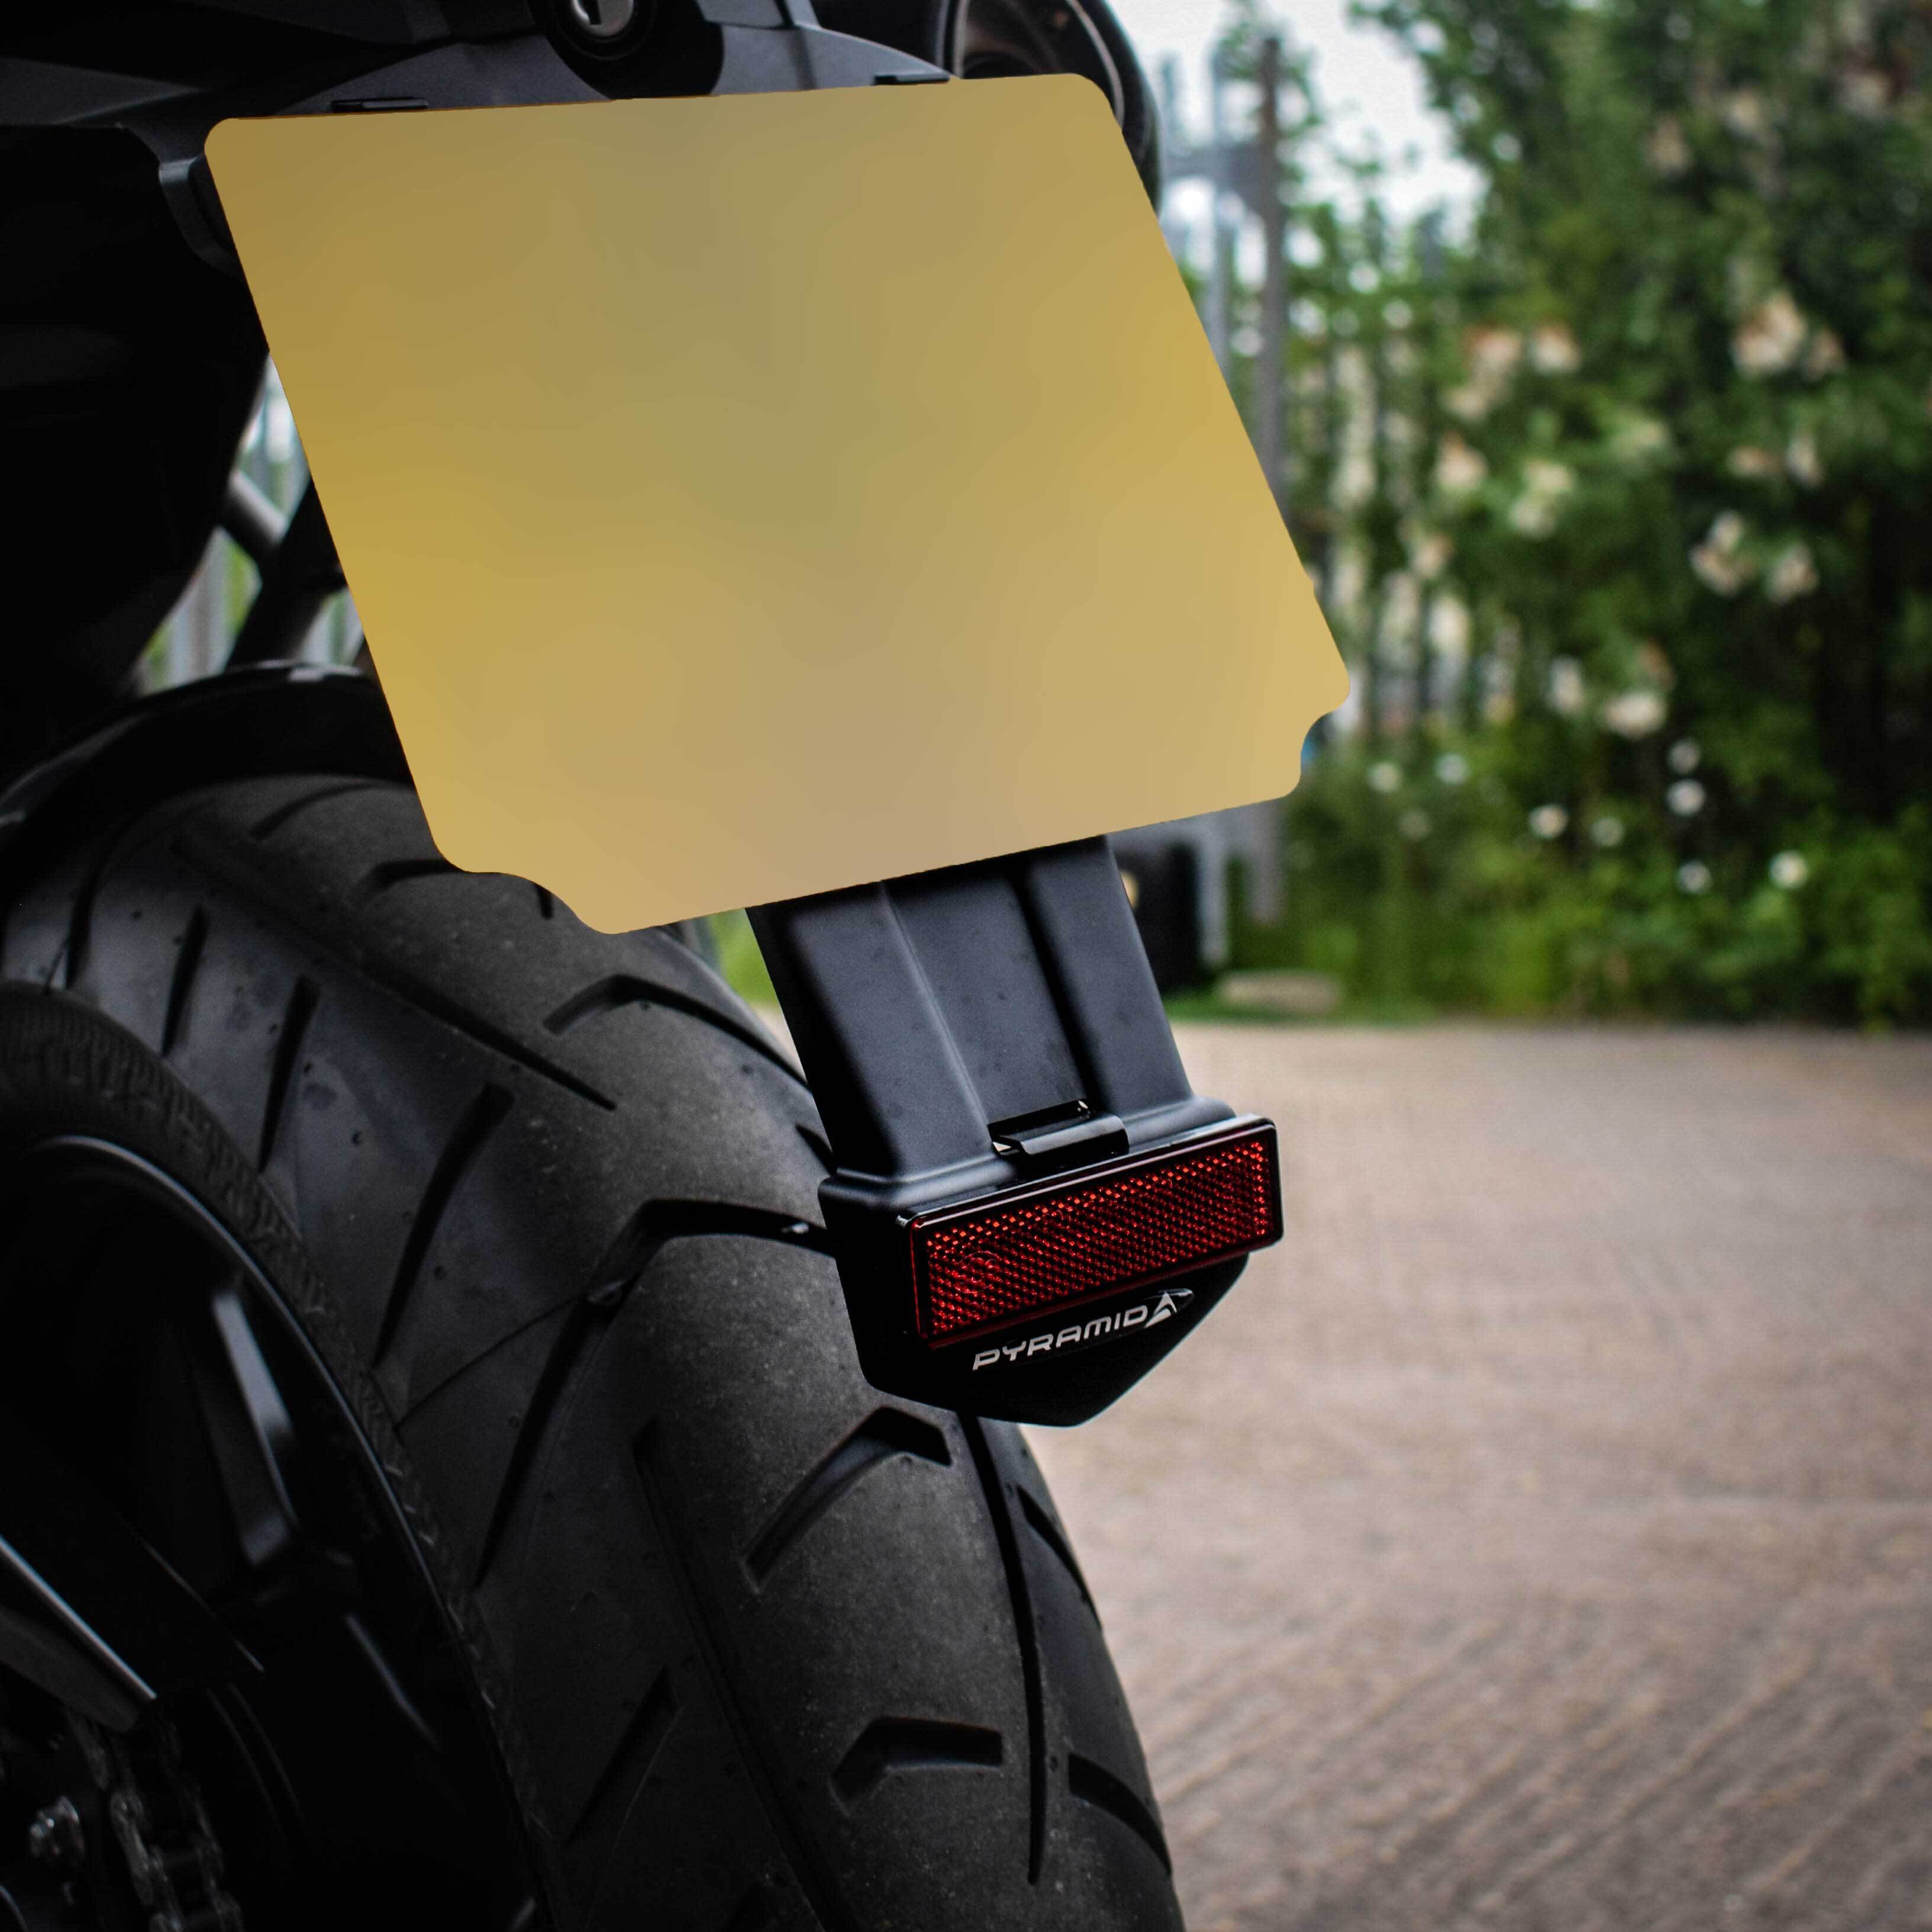 Pyramid Ductail | Matte Black | Triumph Tiger 800 XC/XCX/XCA/Low 2011>Current-08109-Ductails-Pyramid Motorcycle Accessories